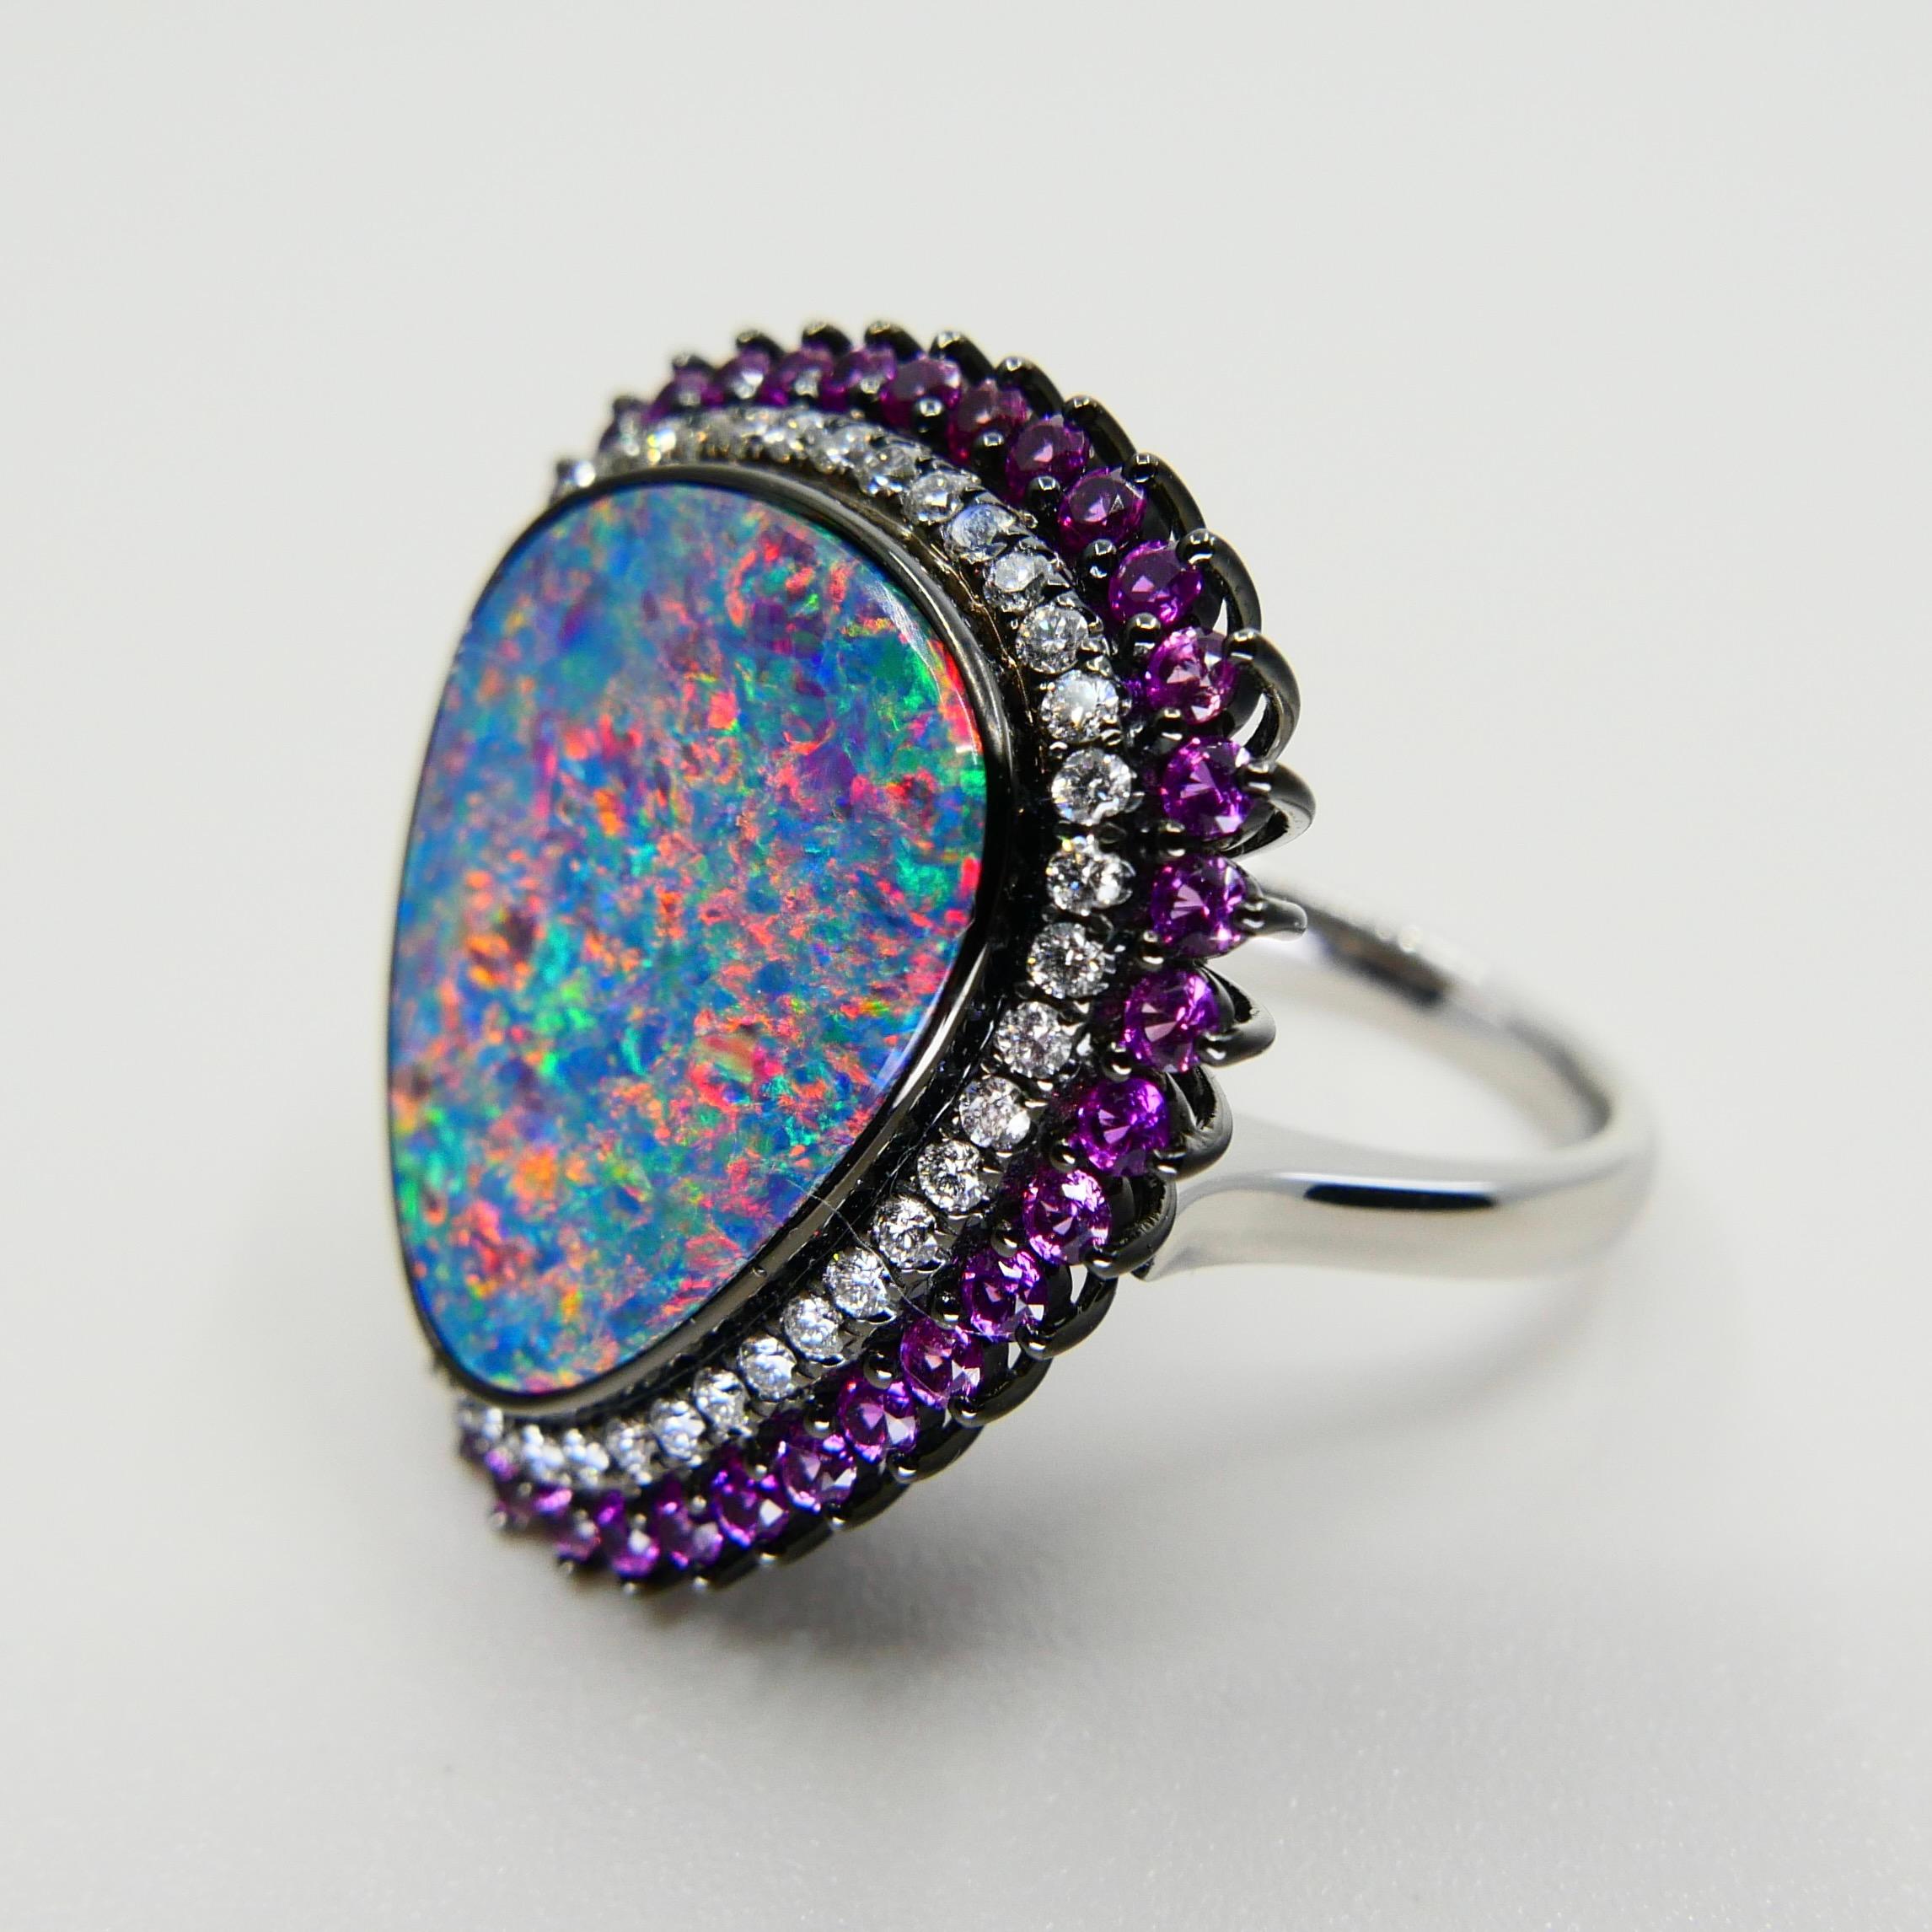 7.84 Cts Au Opal, Pink Sapphire & Diamond Ring Pendant, Superb Play of Colors For Sale 8